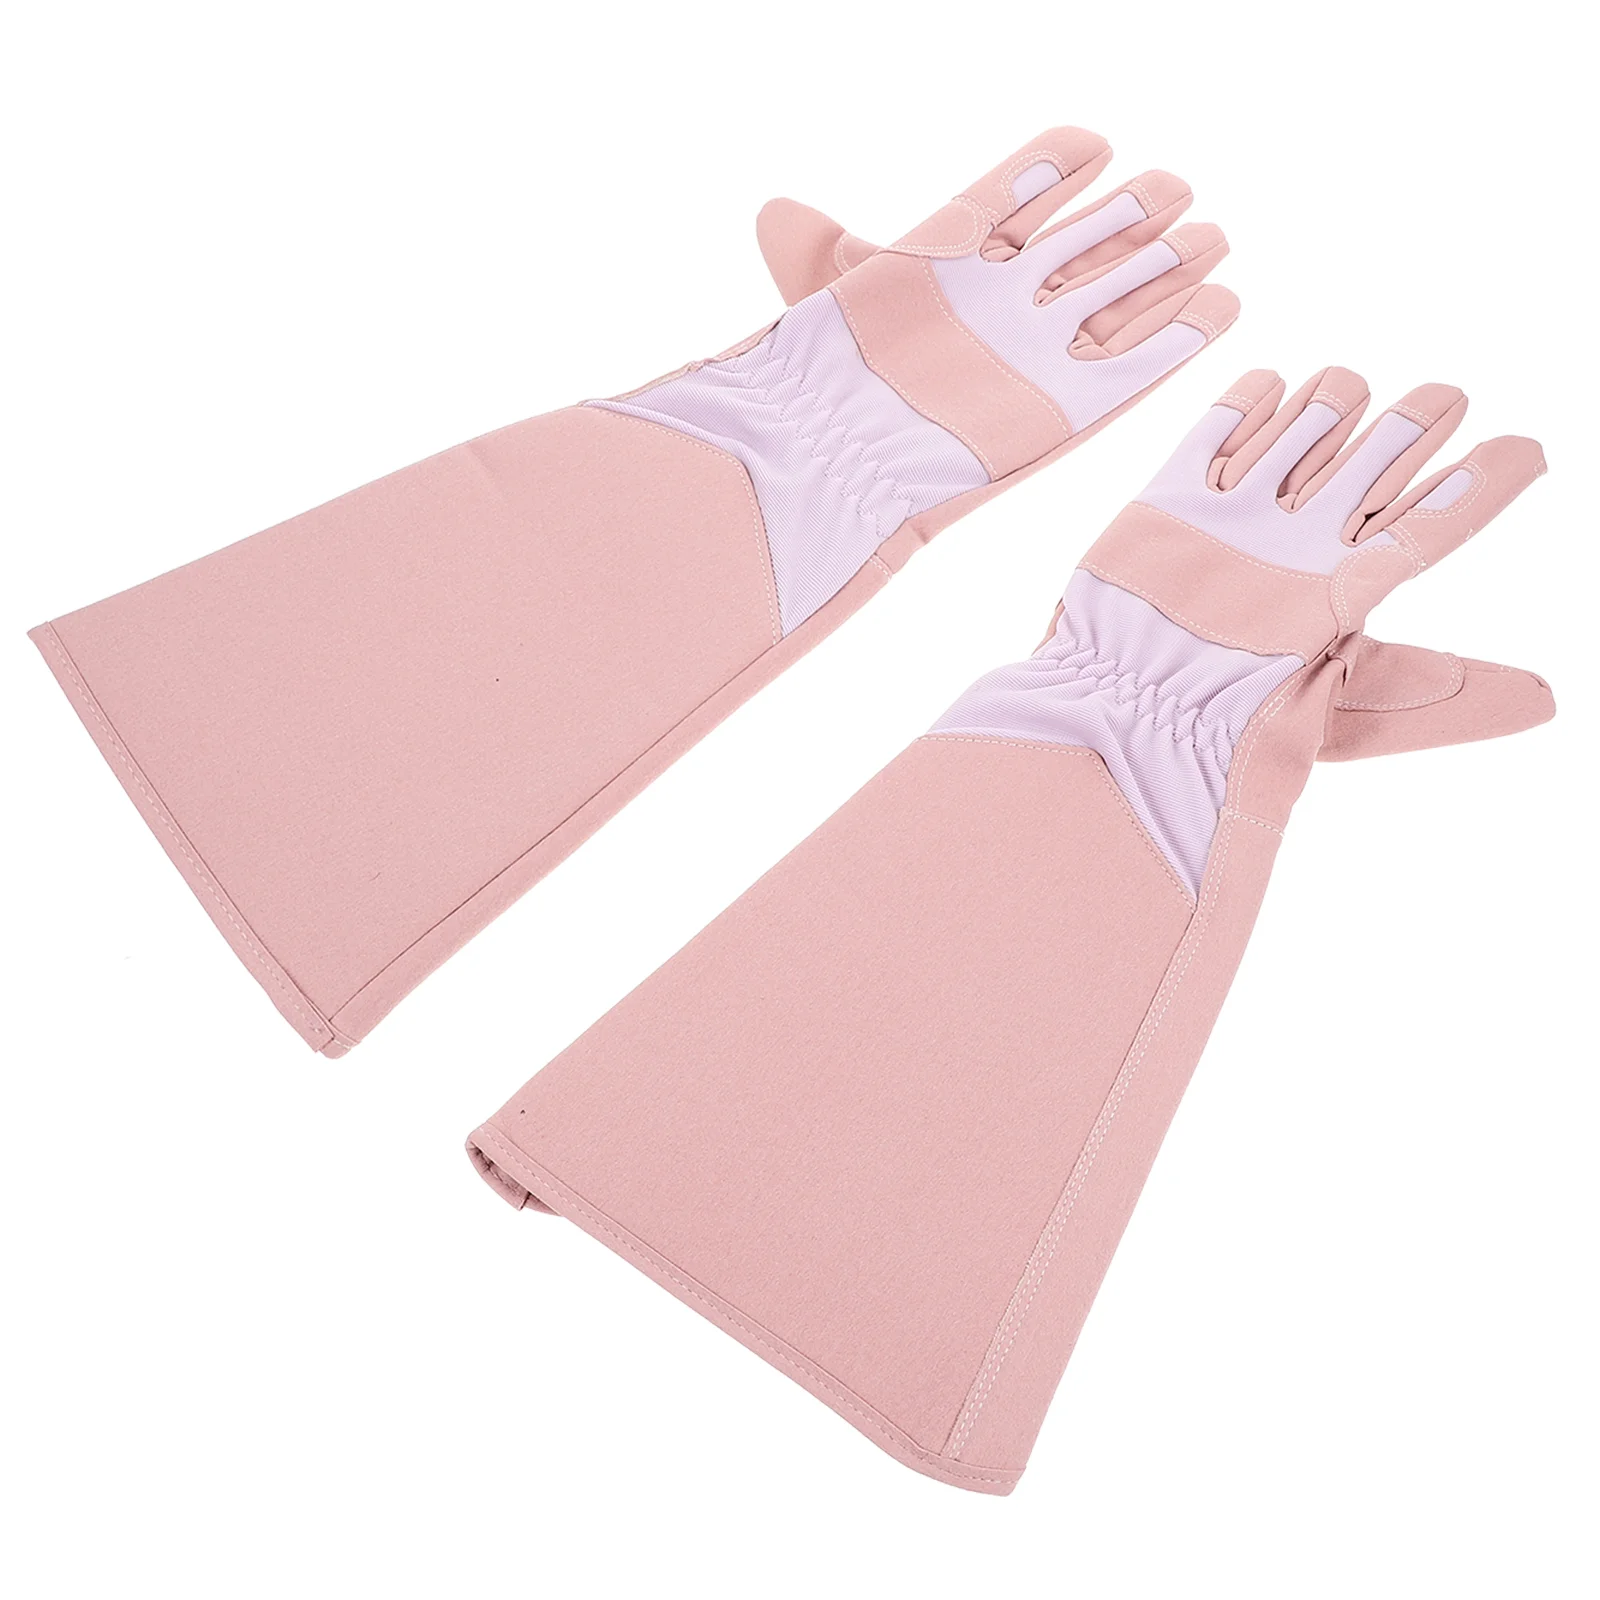 

Gardening Accessories Long Gloves Small Tools Work Mittens Women Thorn Proof Essentials